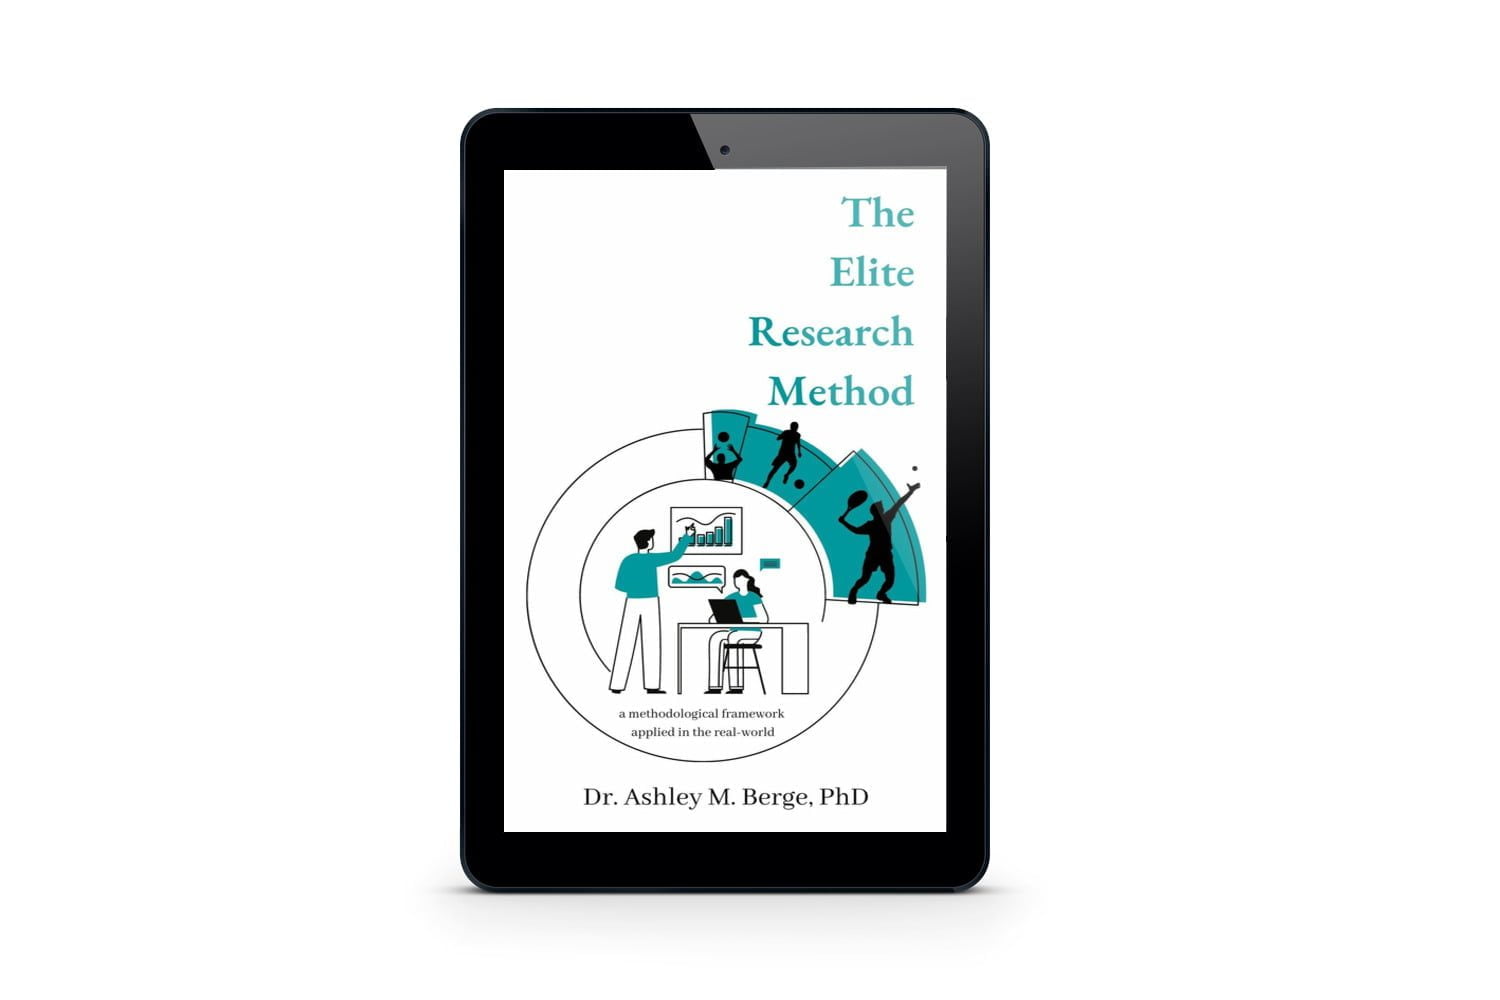 The Elite Research <a href="https://am8international.com/product/the-elite-research-method/" data-type="product" data-id="15187" rel="nofollow">Method</a>